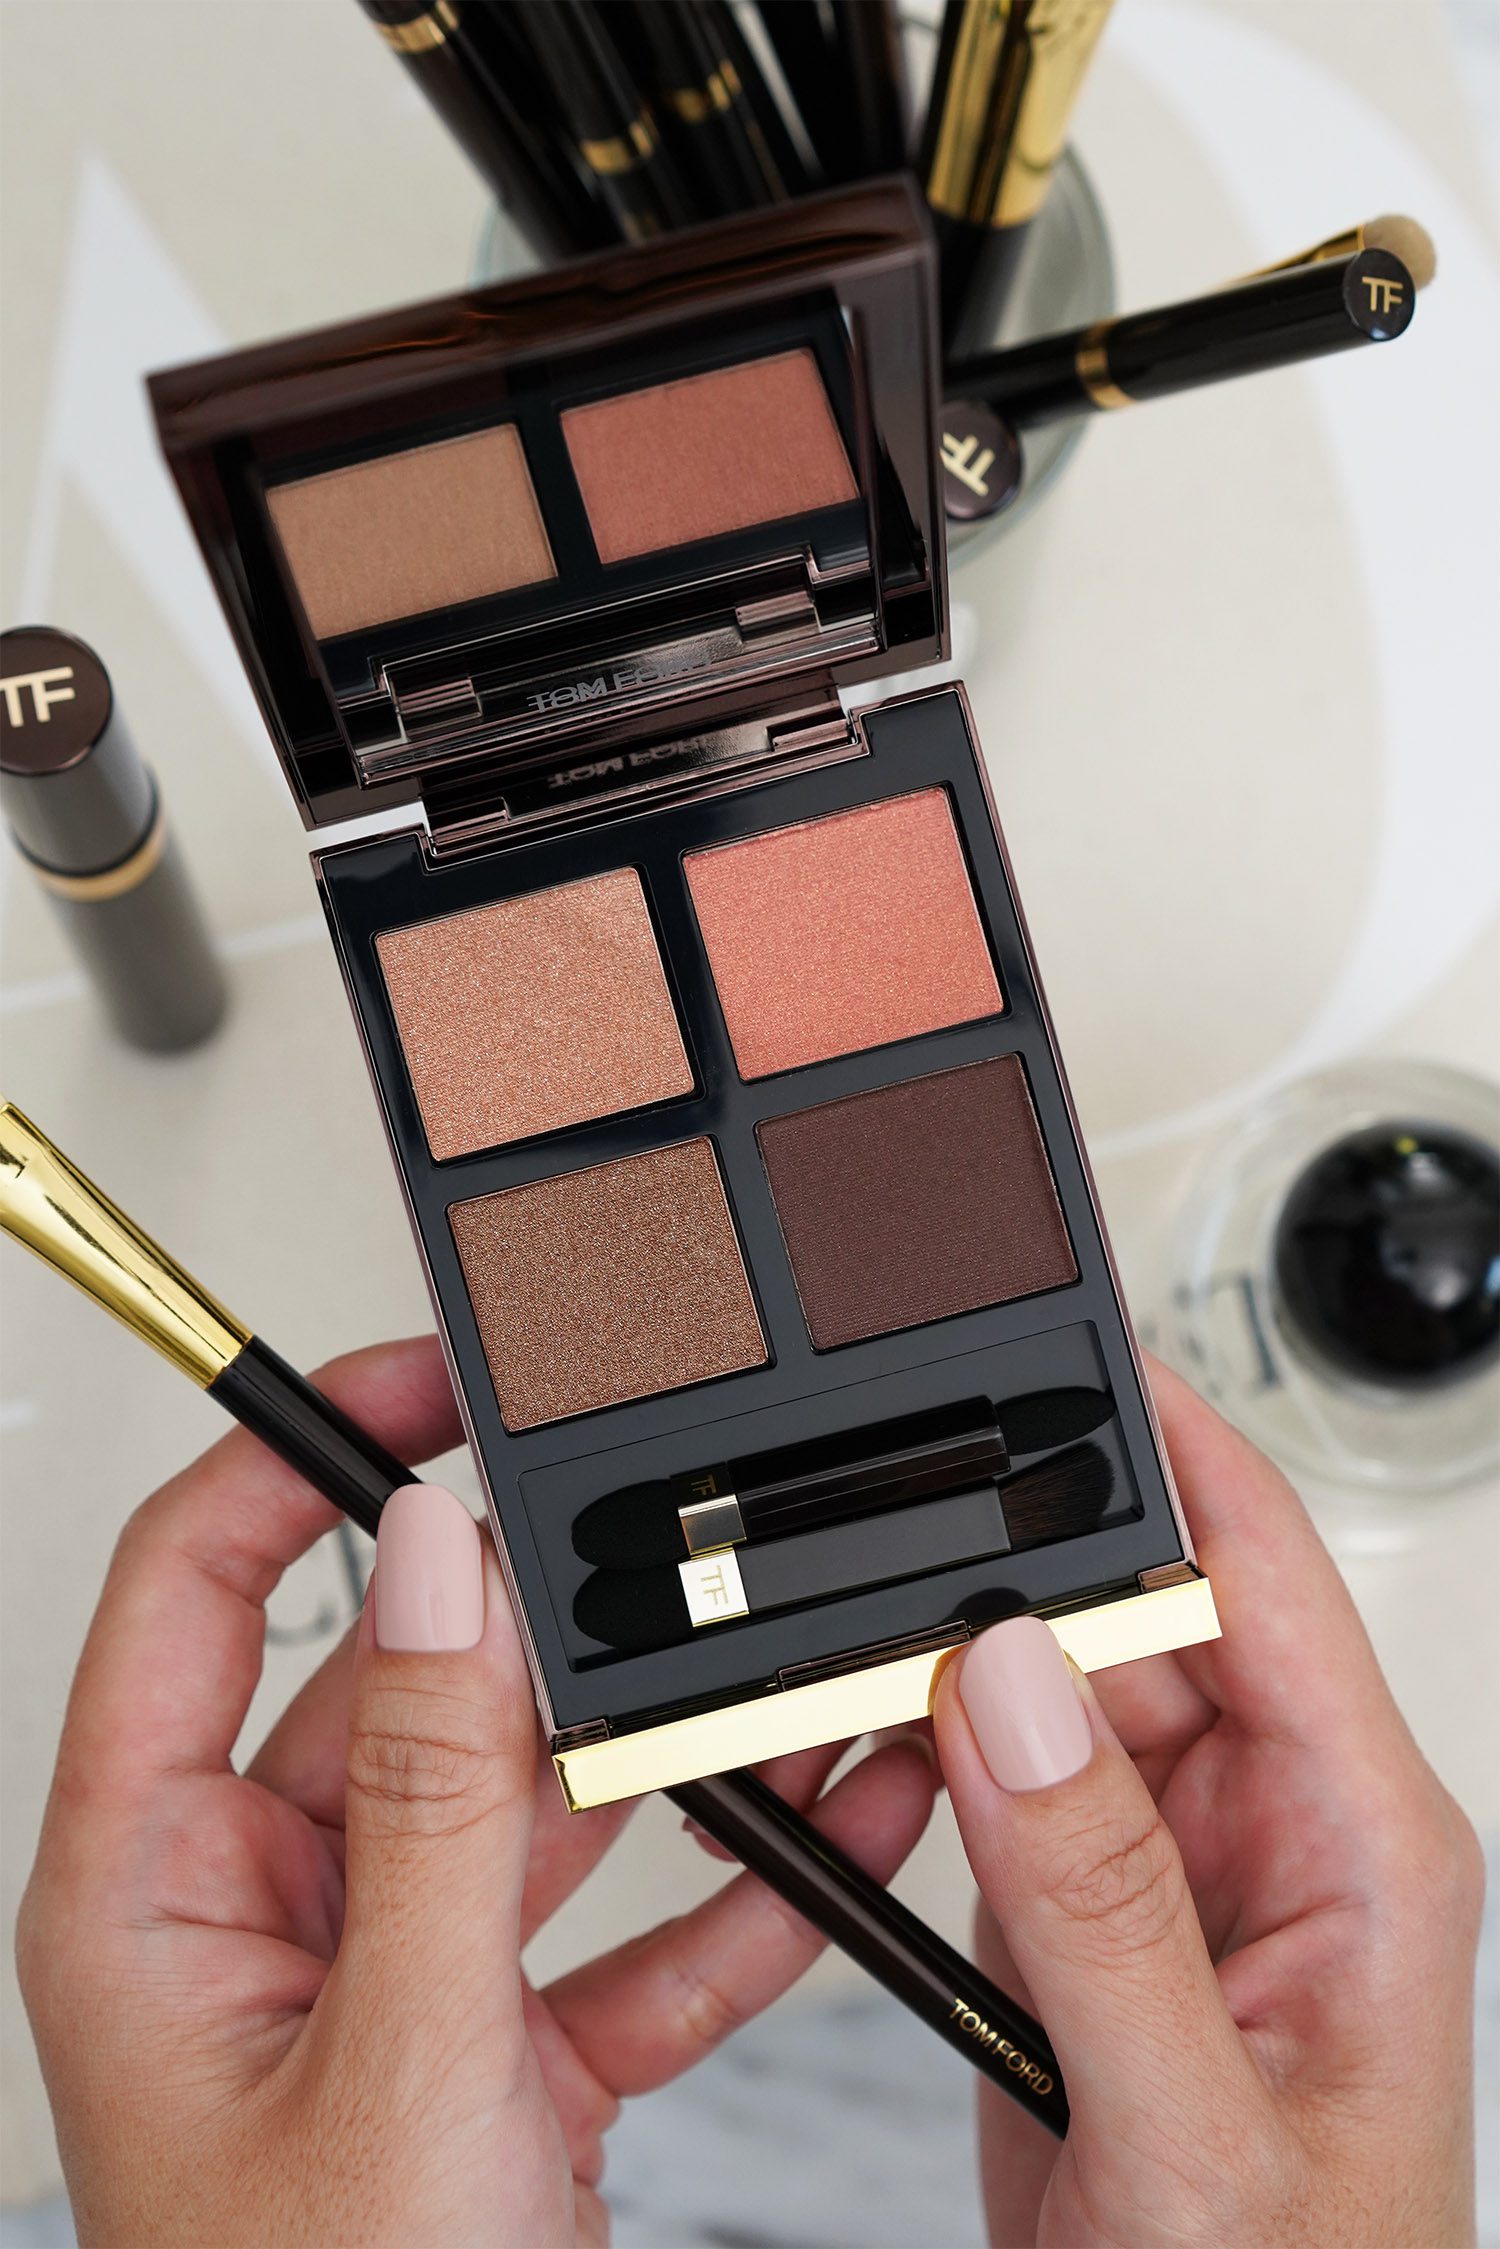 New Tom Ford Beauty at Nordstrom for Spring - The Beauty Look Book